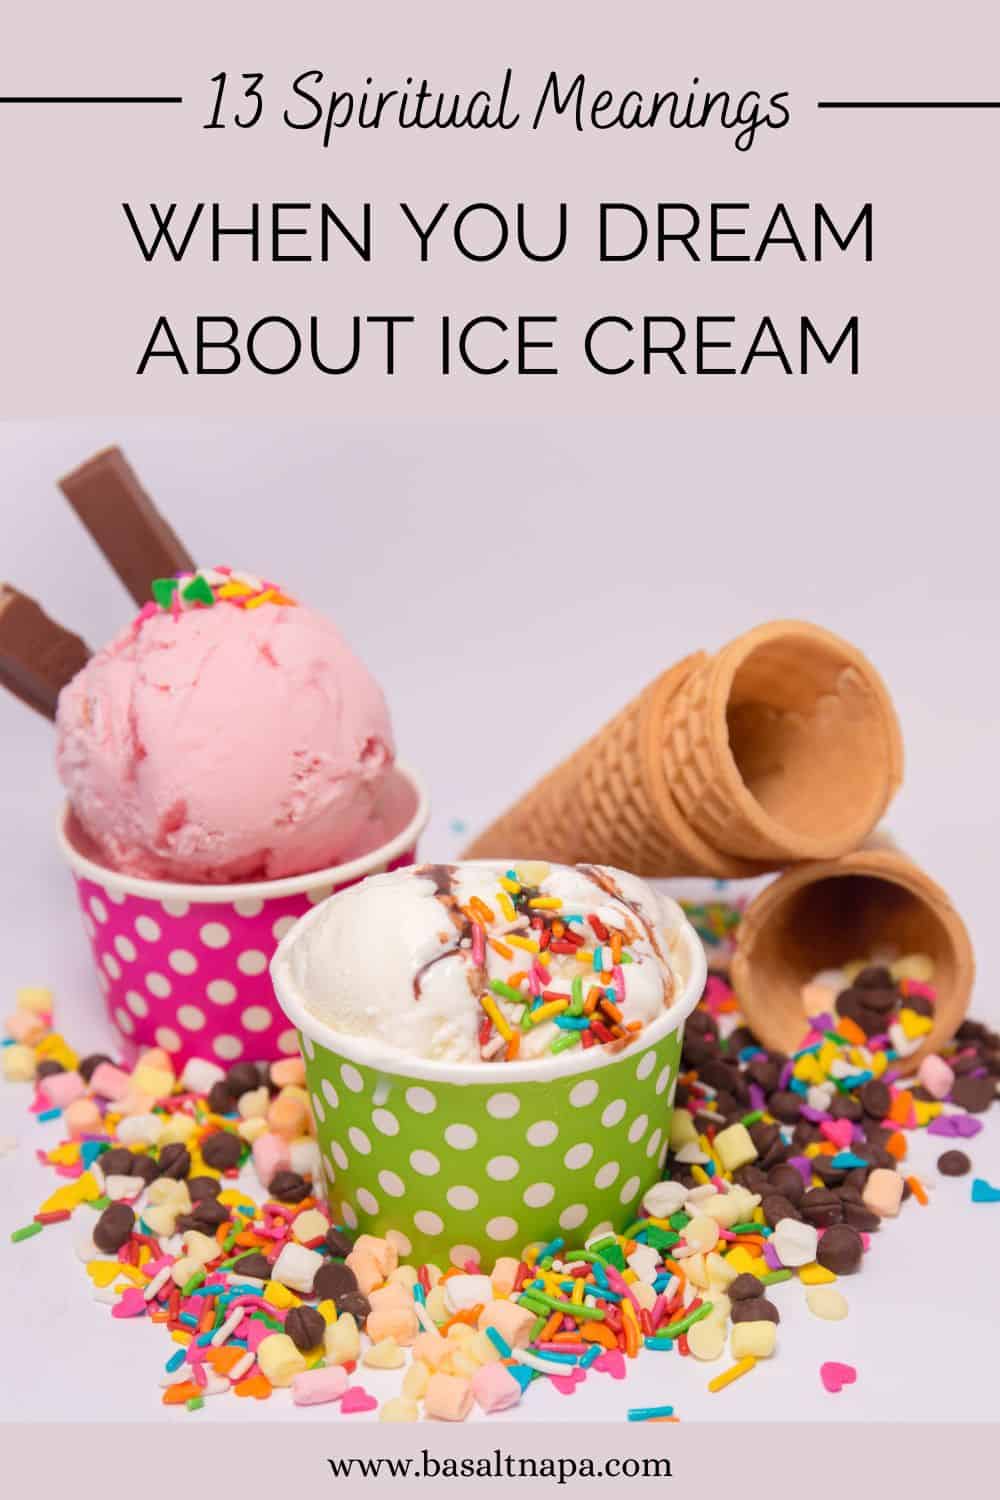 13 Spiriual Meanings When You Dream About Ice Cream